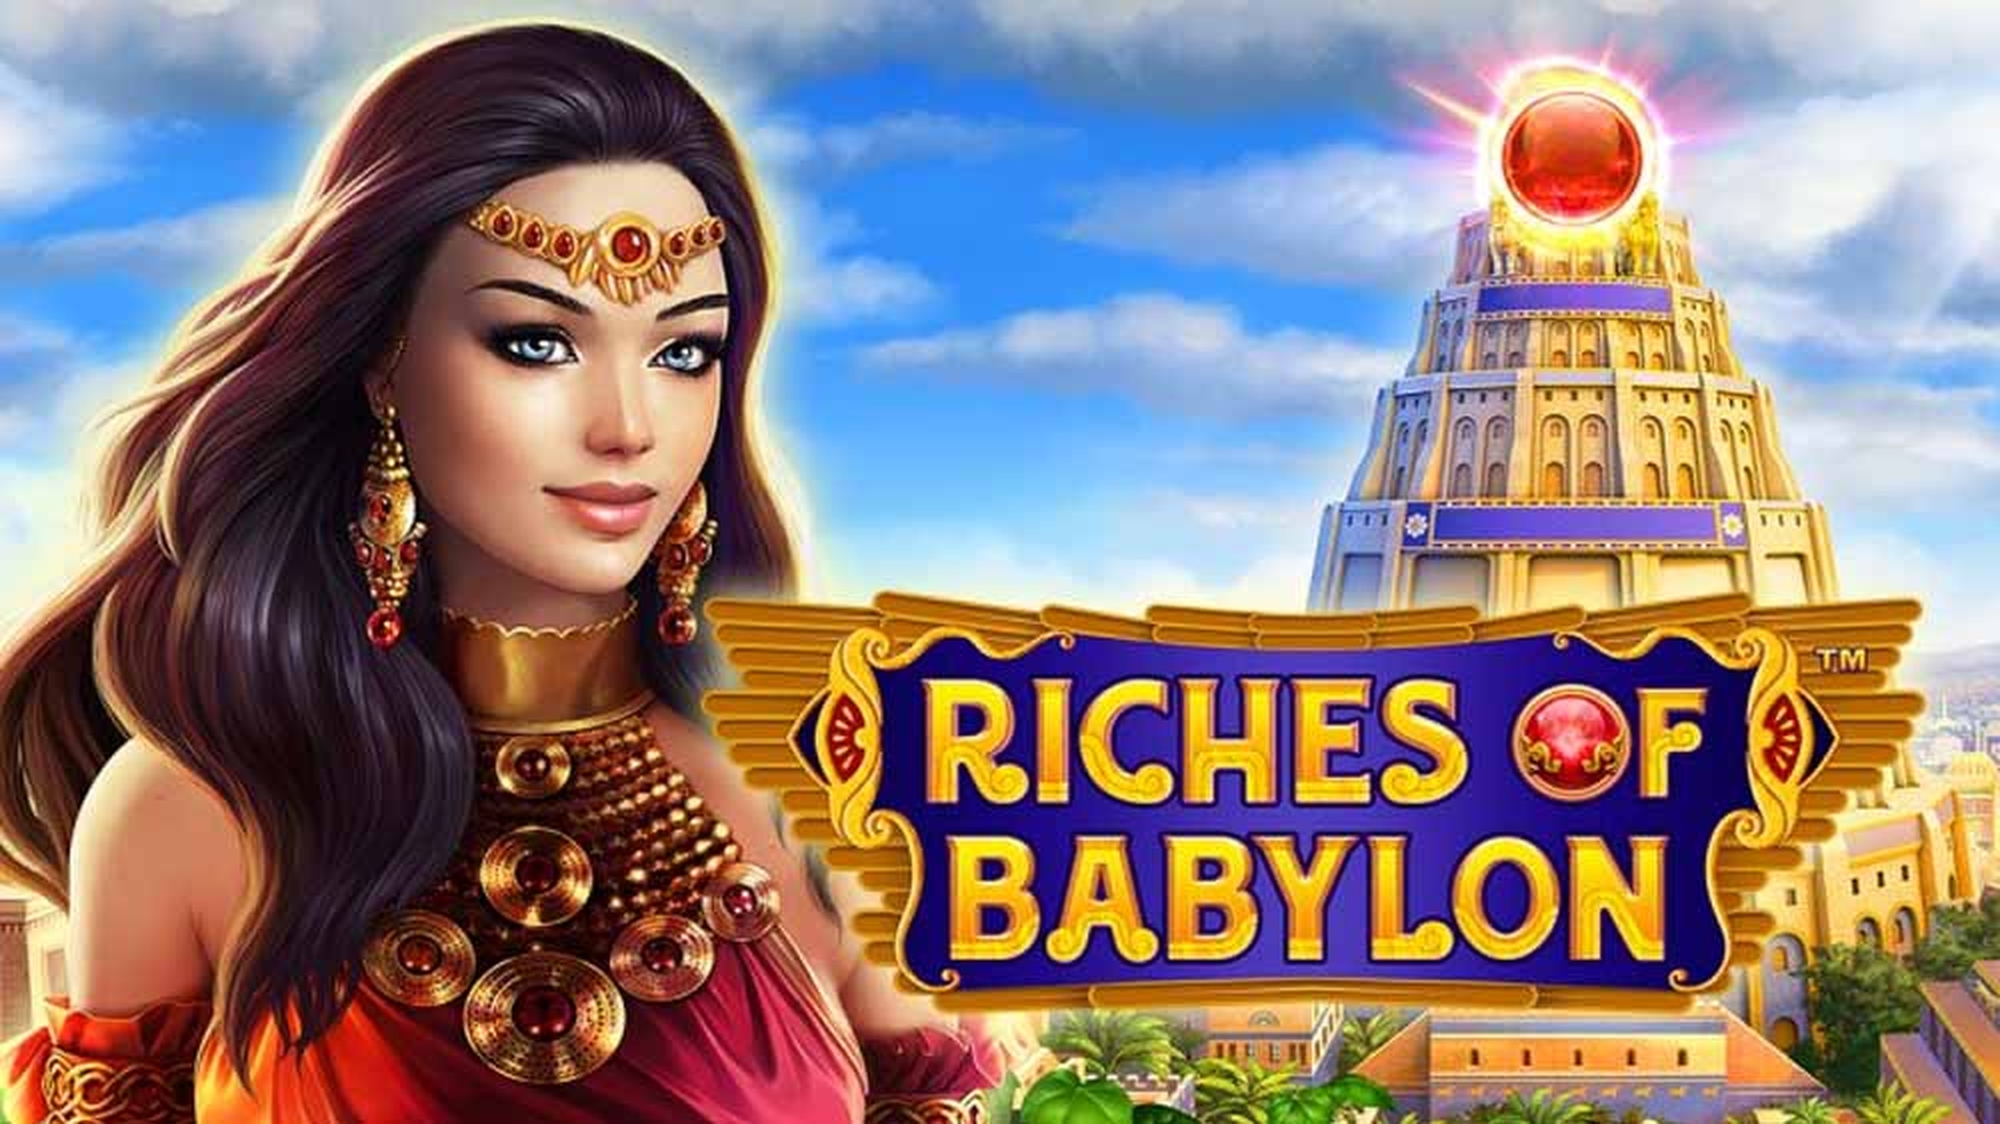 The Riches of Babylon Online Slot Demo Game by Greentube